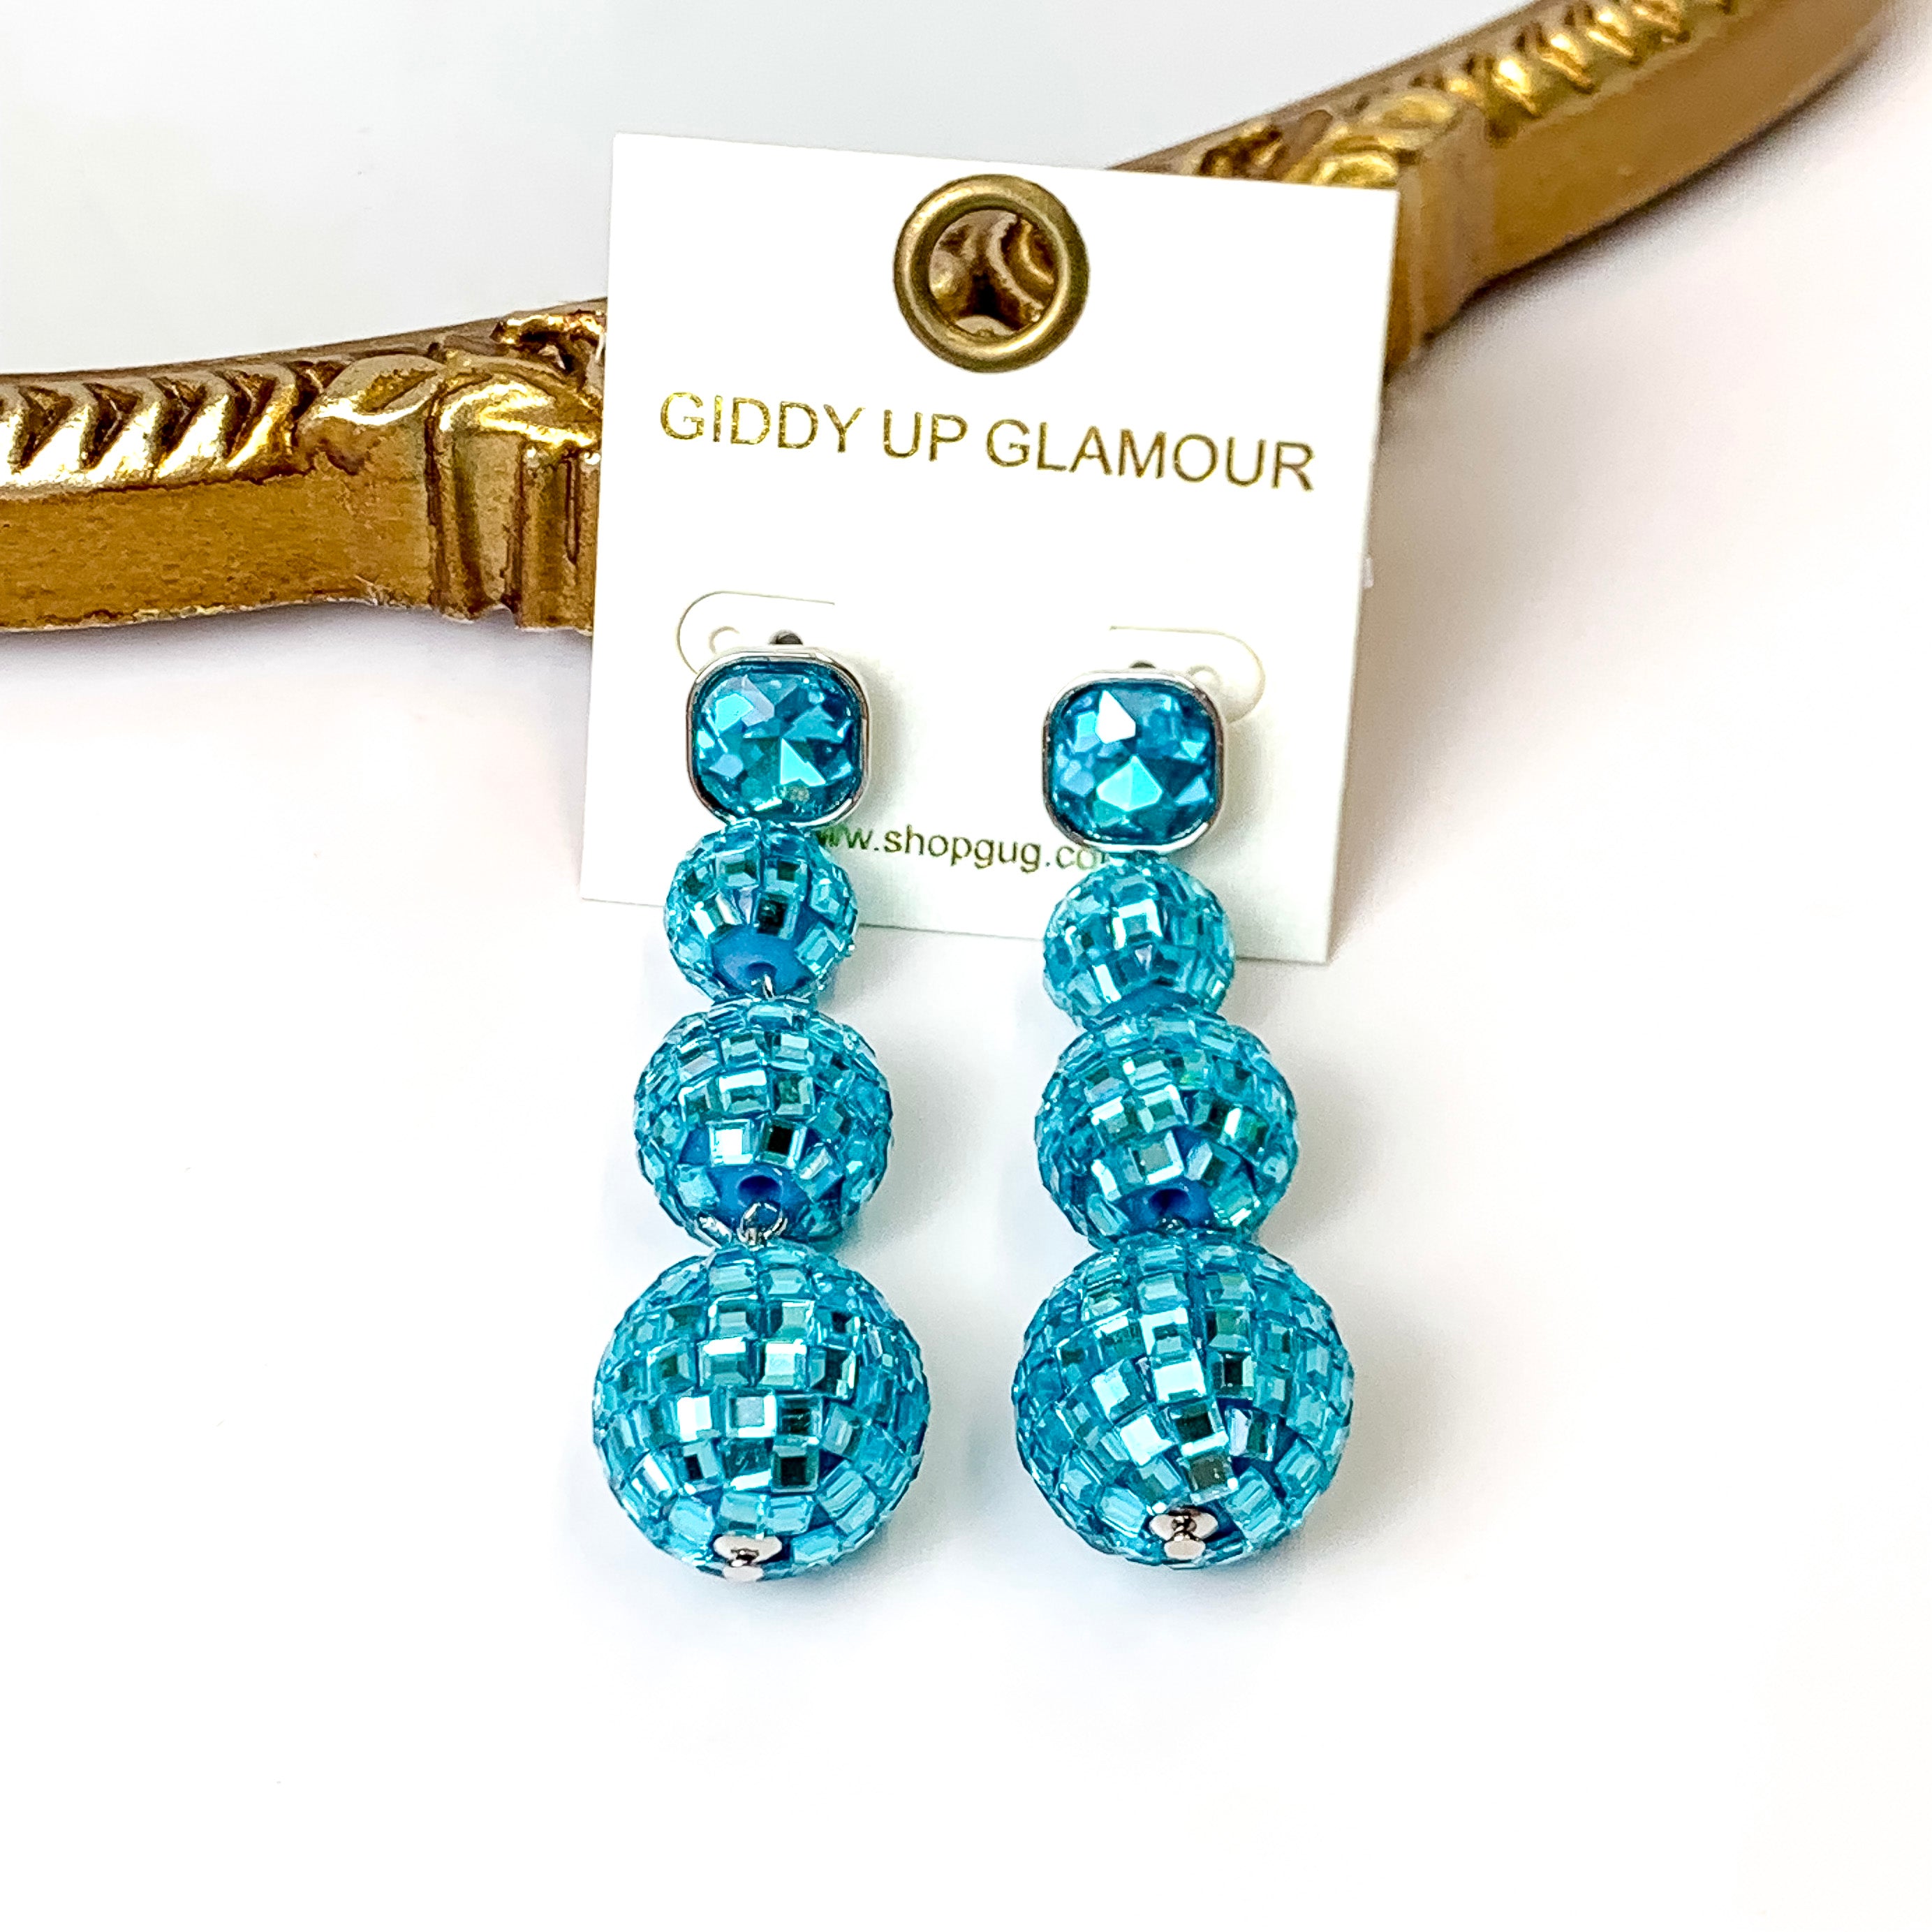 Cushion Crystal Post Disco Ball Dangle Earrings in Turquoise Blue - Giddy Up Glamour Boutique